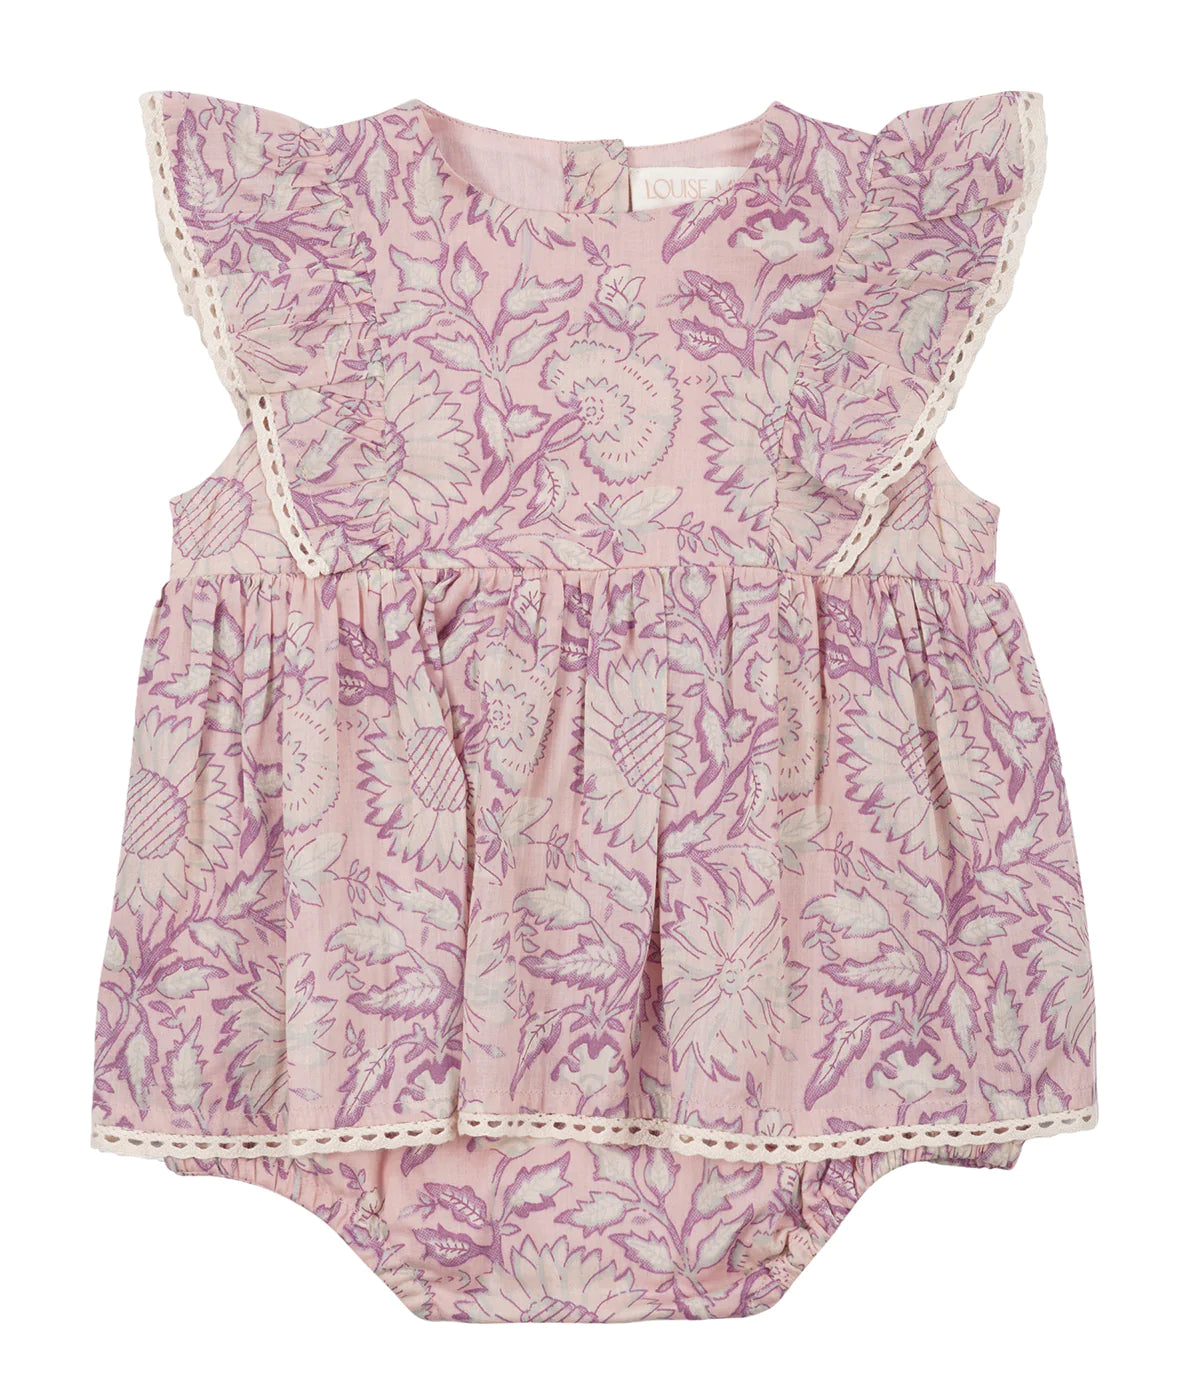 The Lena romper in pink daisy garden has been tailored to look like a pretty dress. Ruffles, gathers and lace mingle in a shimmering round dance, creating a very poetic bohemian piece. Made with 100% organic cotton.